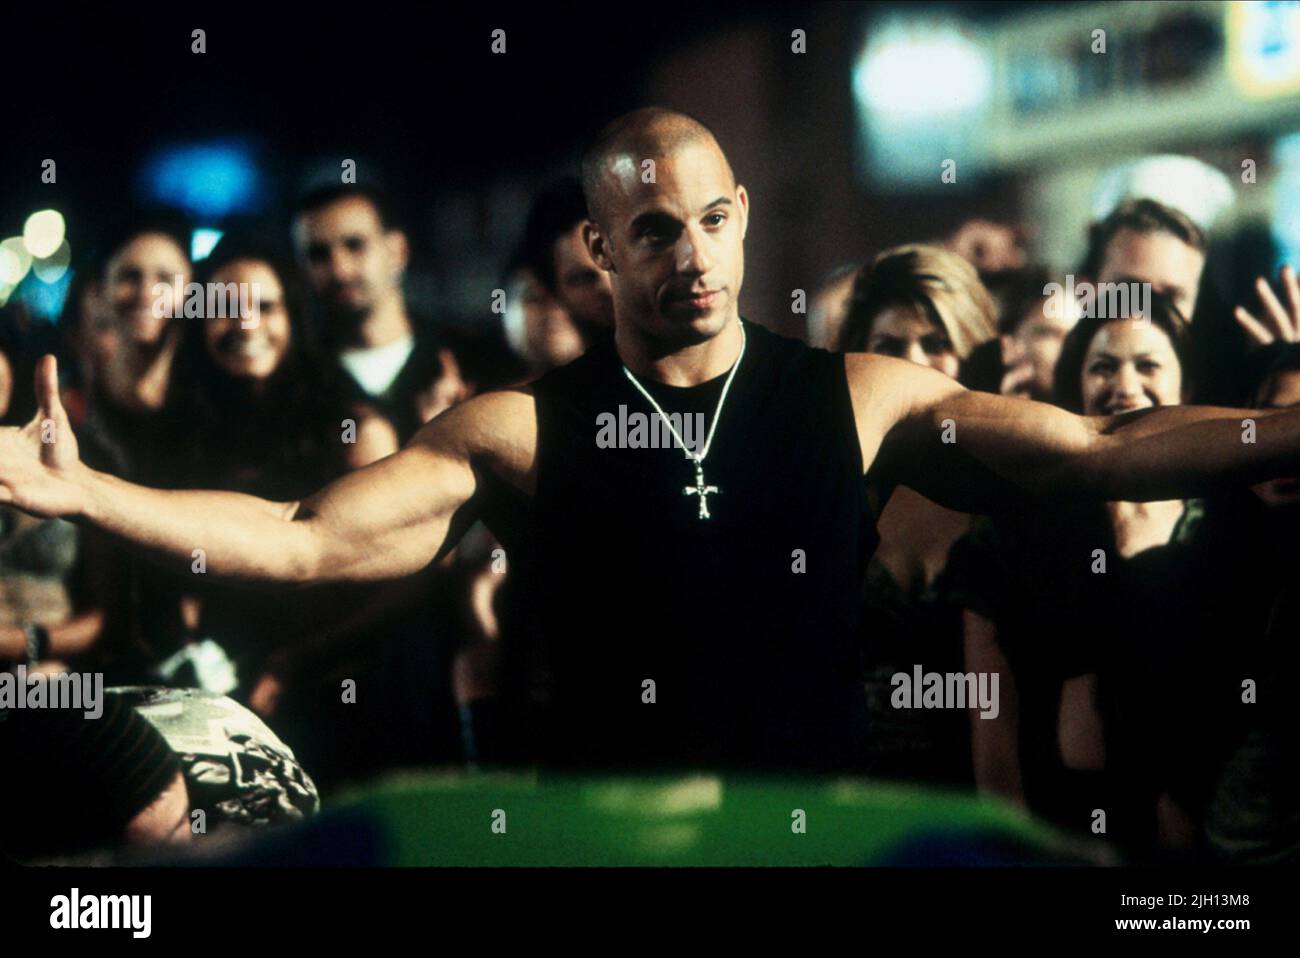 VIN DIESEL, THE FAST AND THE FURIOUS, 2001 Stock Photo